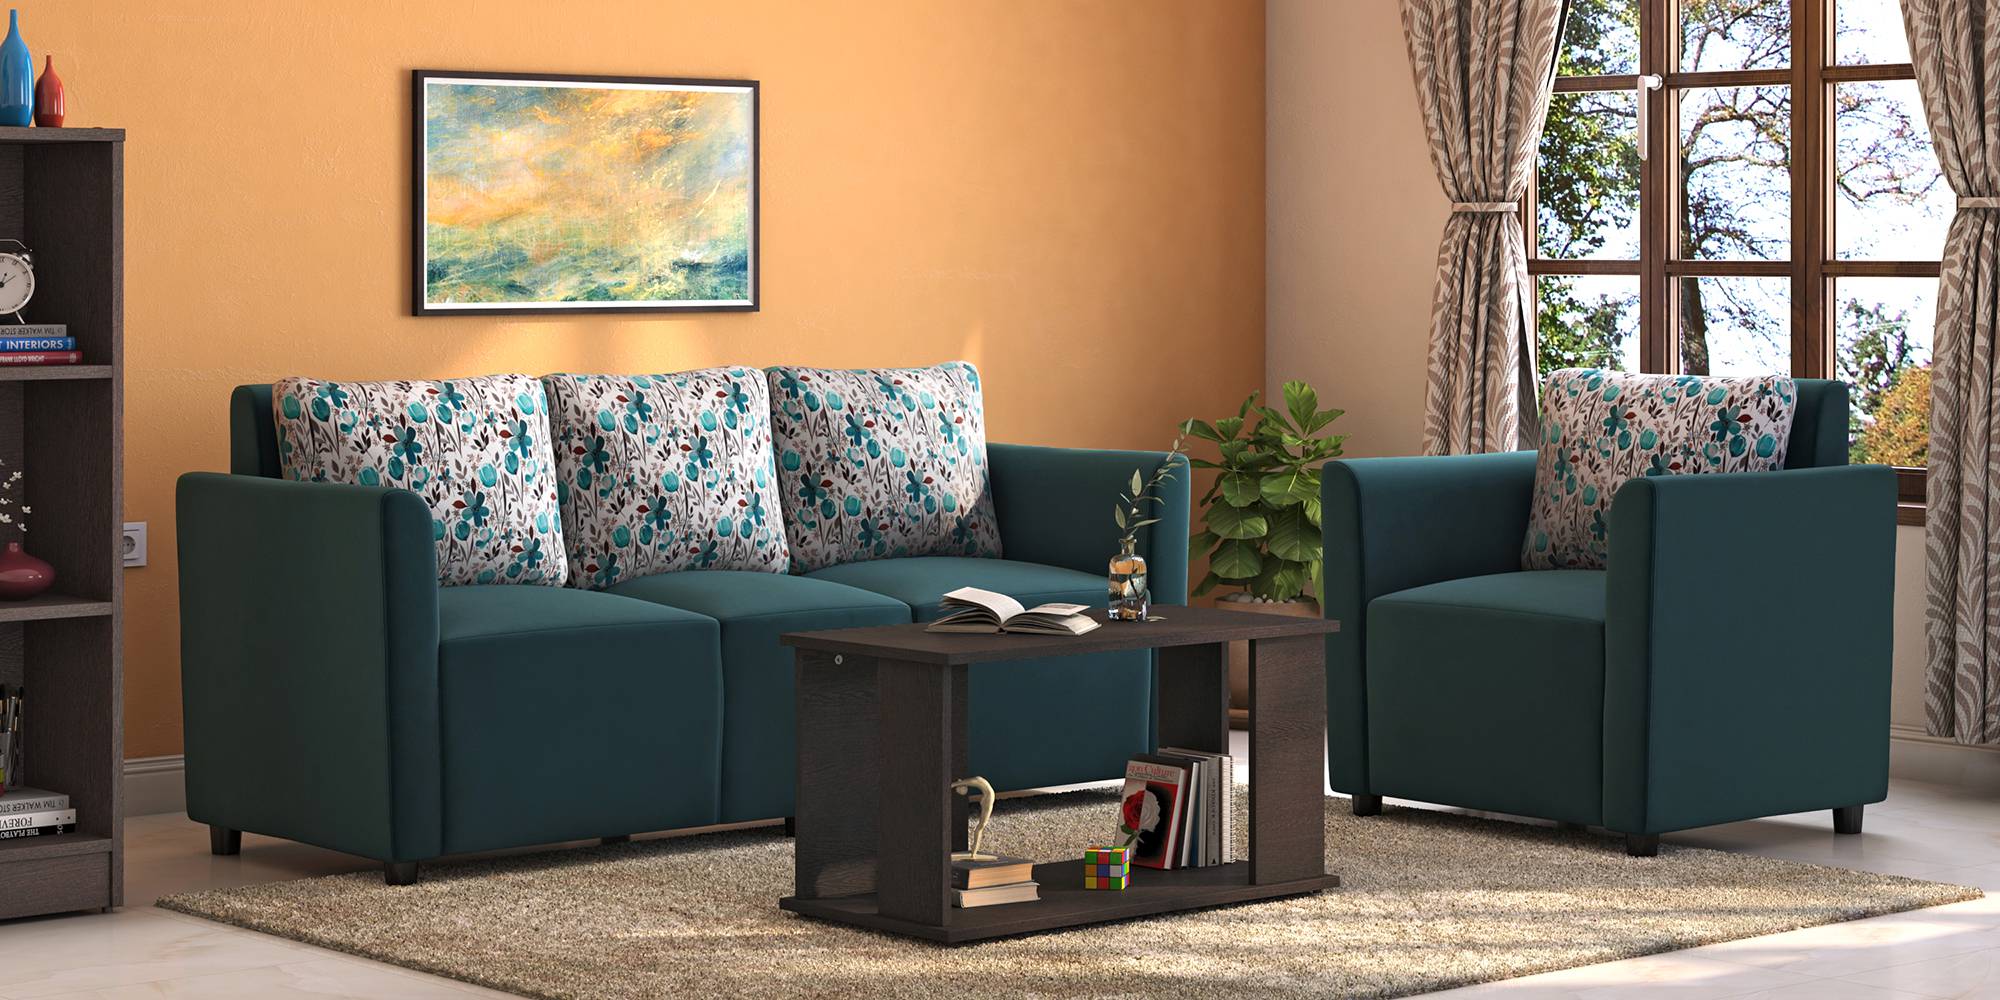 Ella 1 Seater Fabric Sofa - Tempo Teal with Teal Floral by Urban Ladder - - 